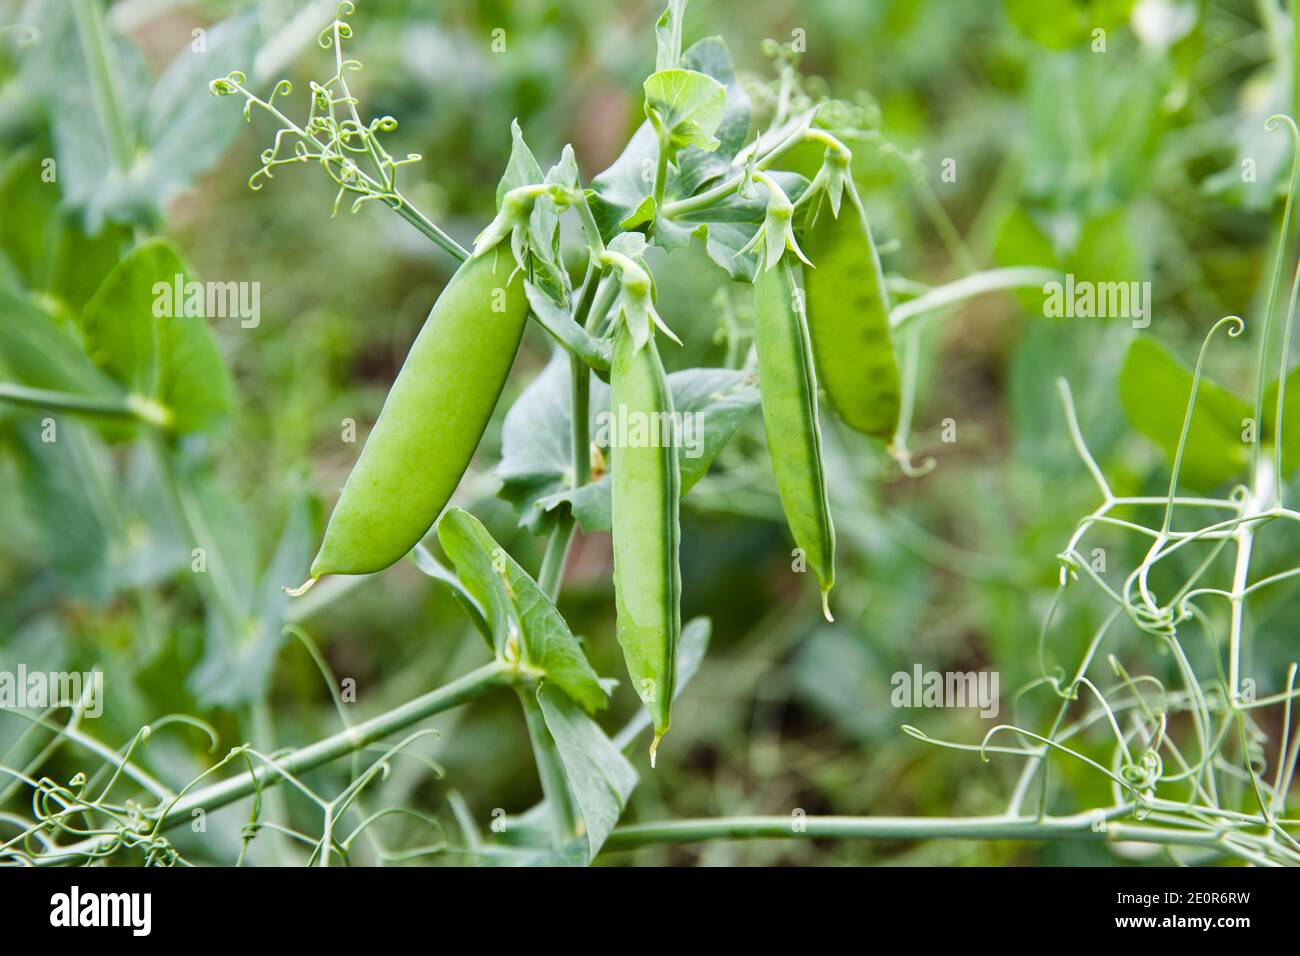 Green pea pods on a branch. Crop of peas. Summer landscape. Stock Photo